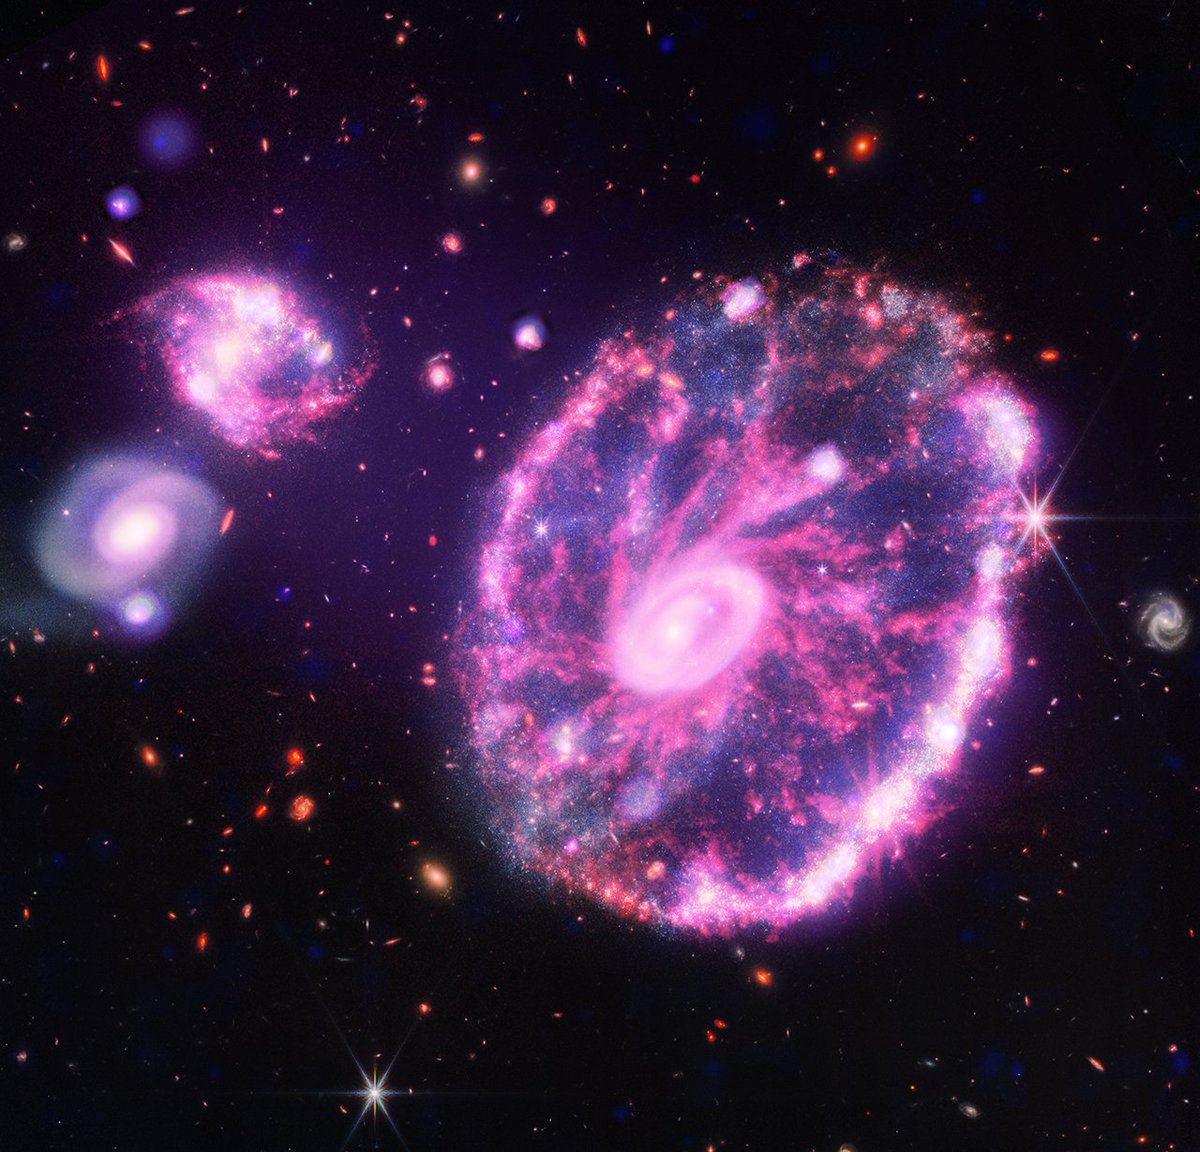 The Cartwheel Galaxy gets its unique shape from a collision with a smaller galaxy. When the smaller galaxy punched through the Cartwheel, it triggered star formation that appears around an outer ring and elsewhere in the galaxy. This view combines data from Chandra & @NASAWebb.